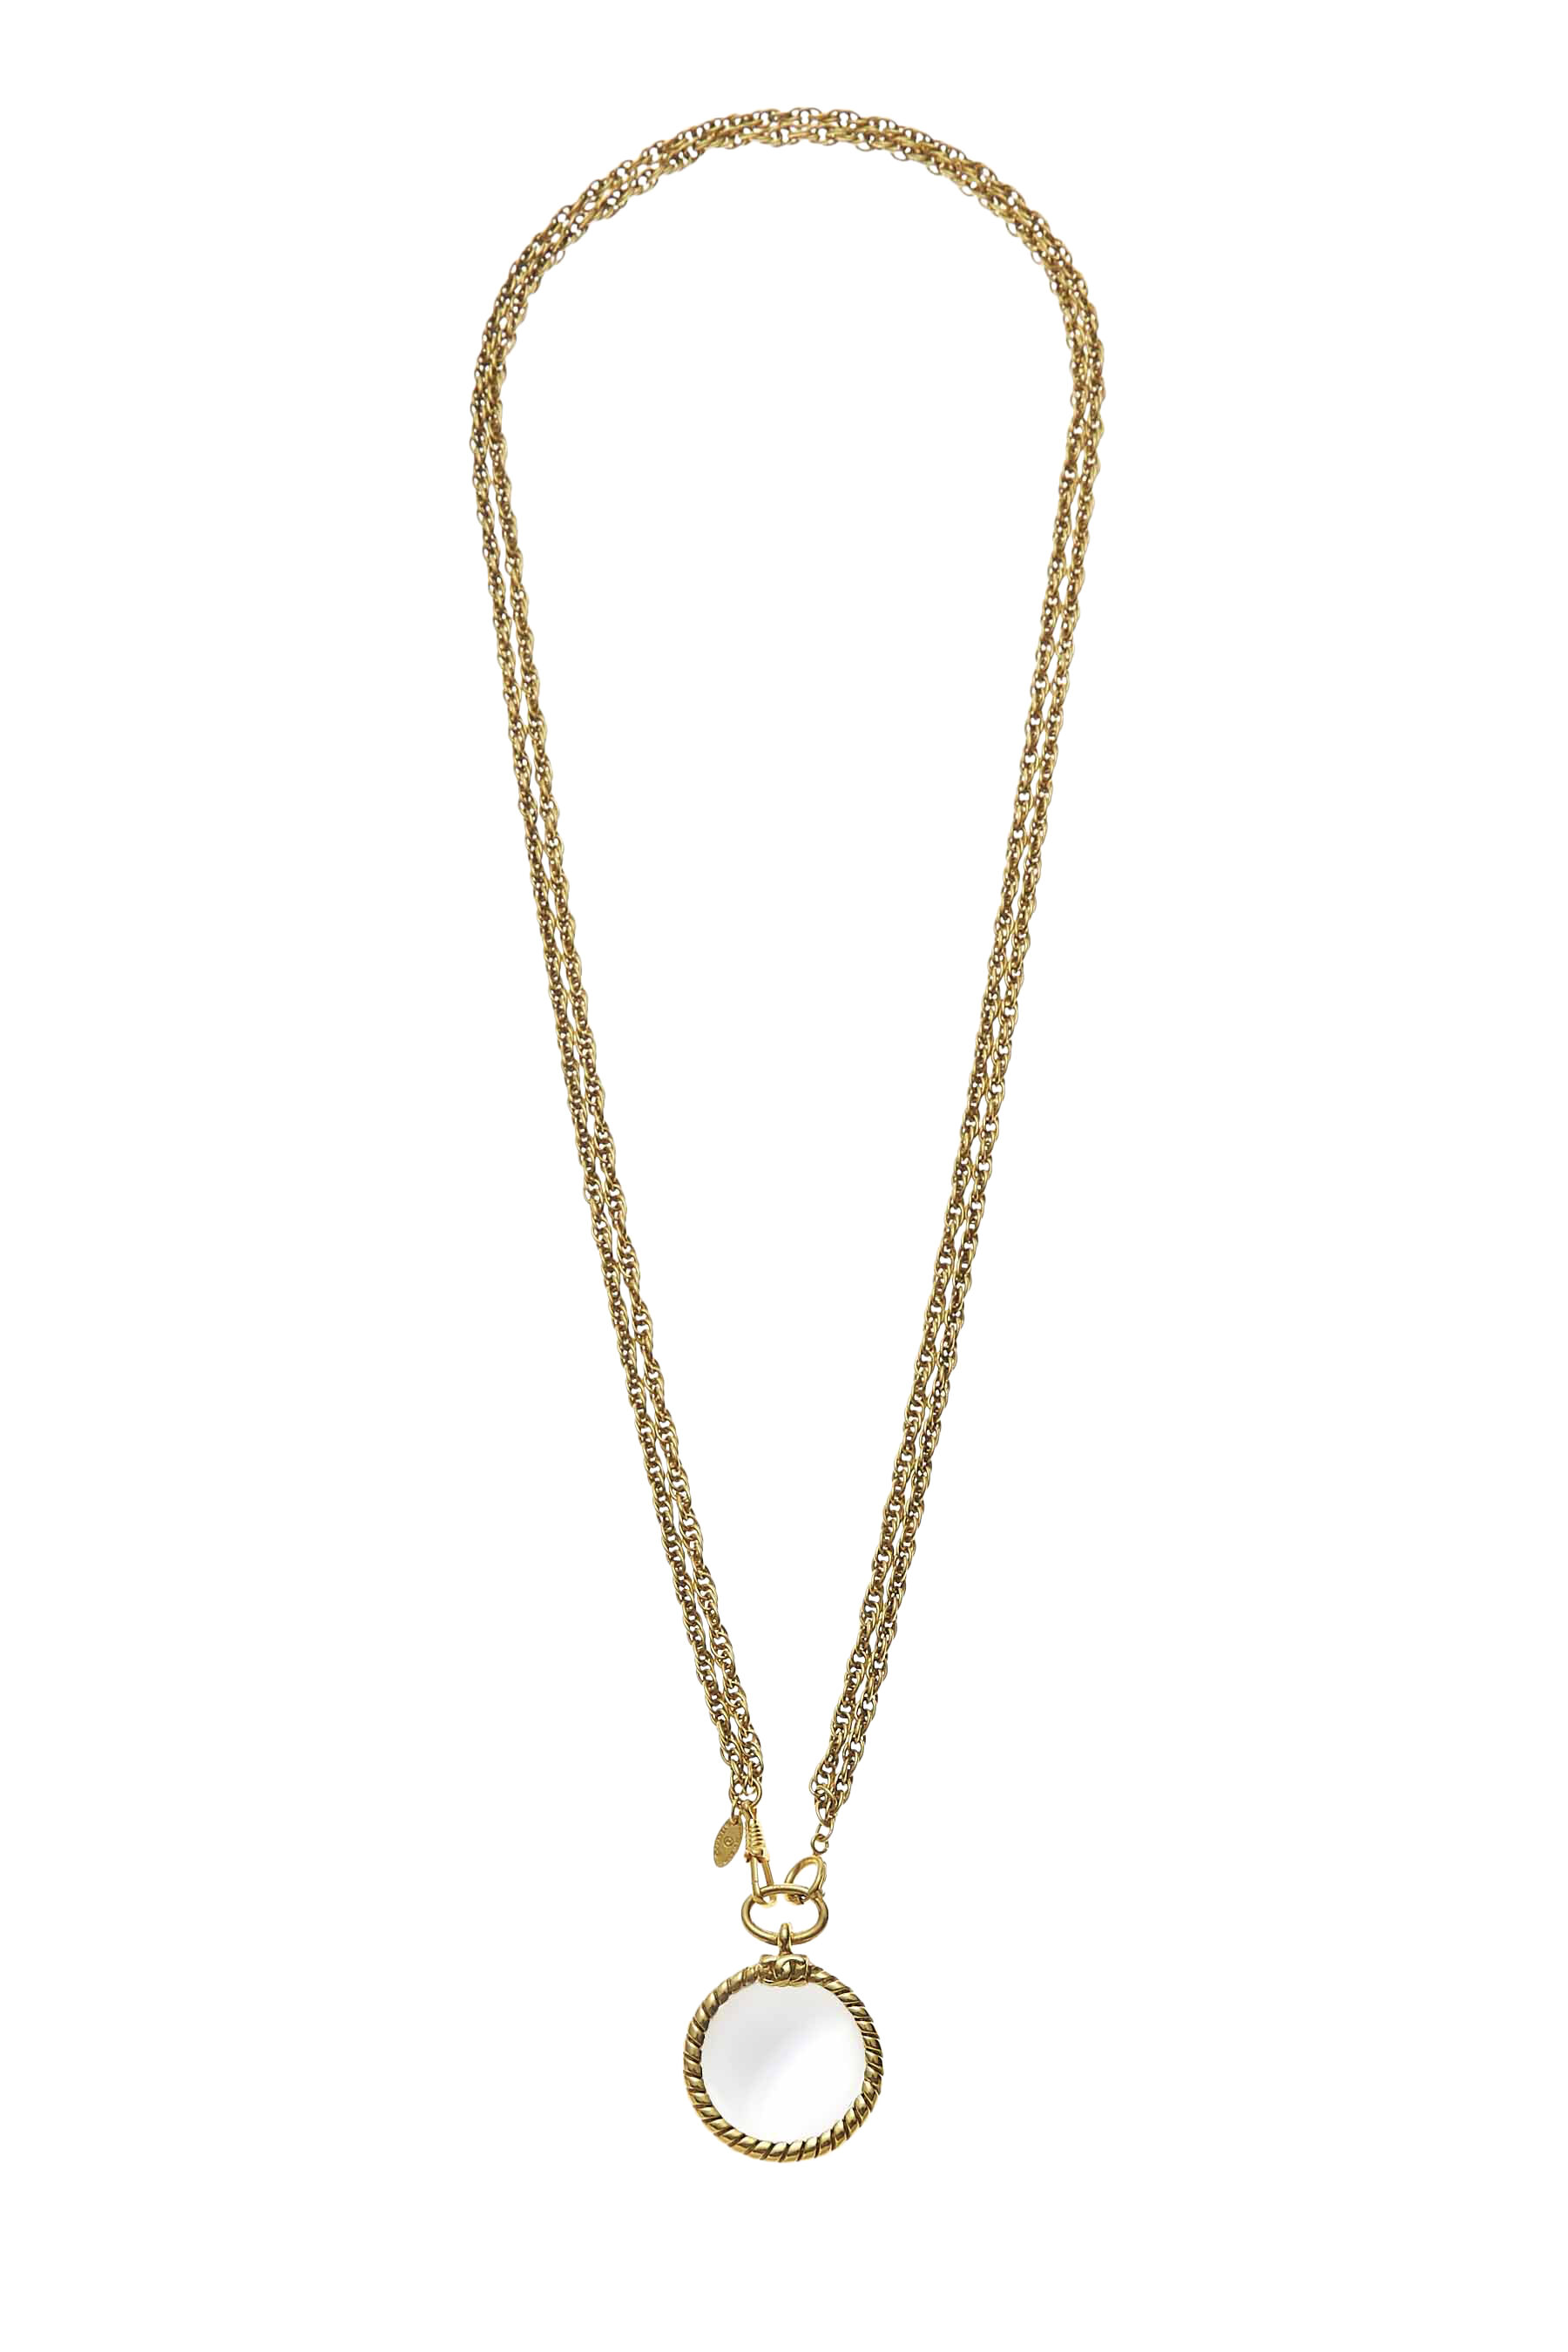 chanel necklace cc logo gold plated